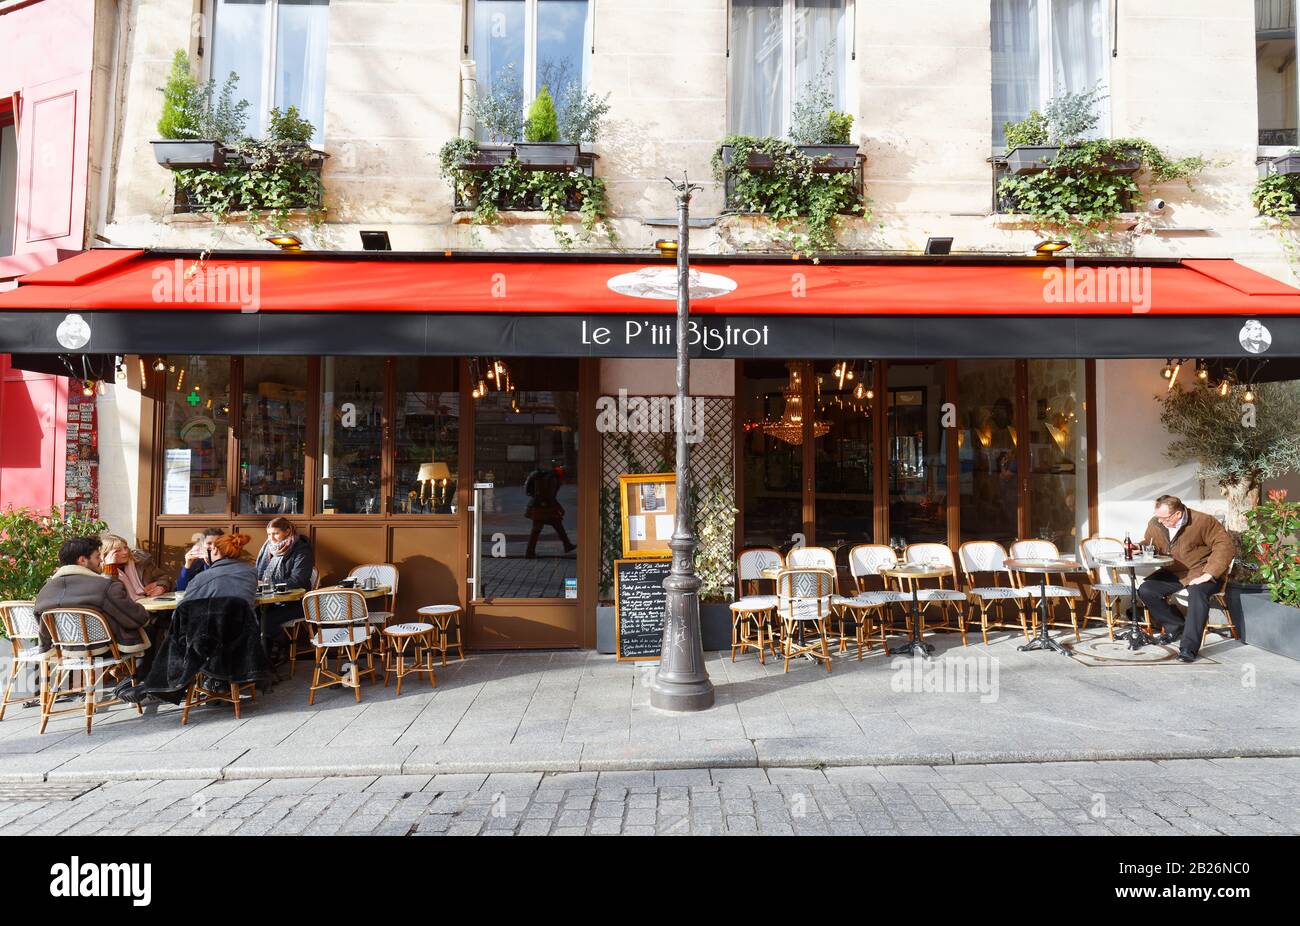 Le Petit Bistrot is traditional French cafe located near Porte Saint ...